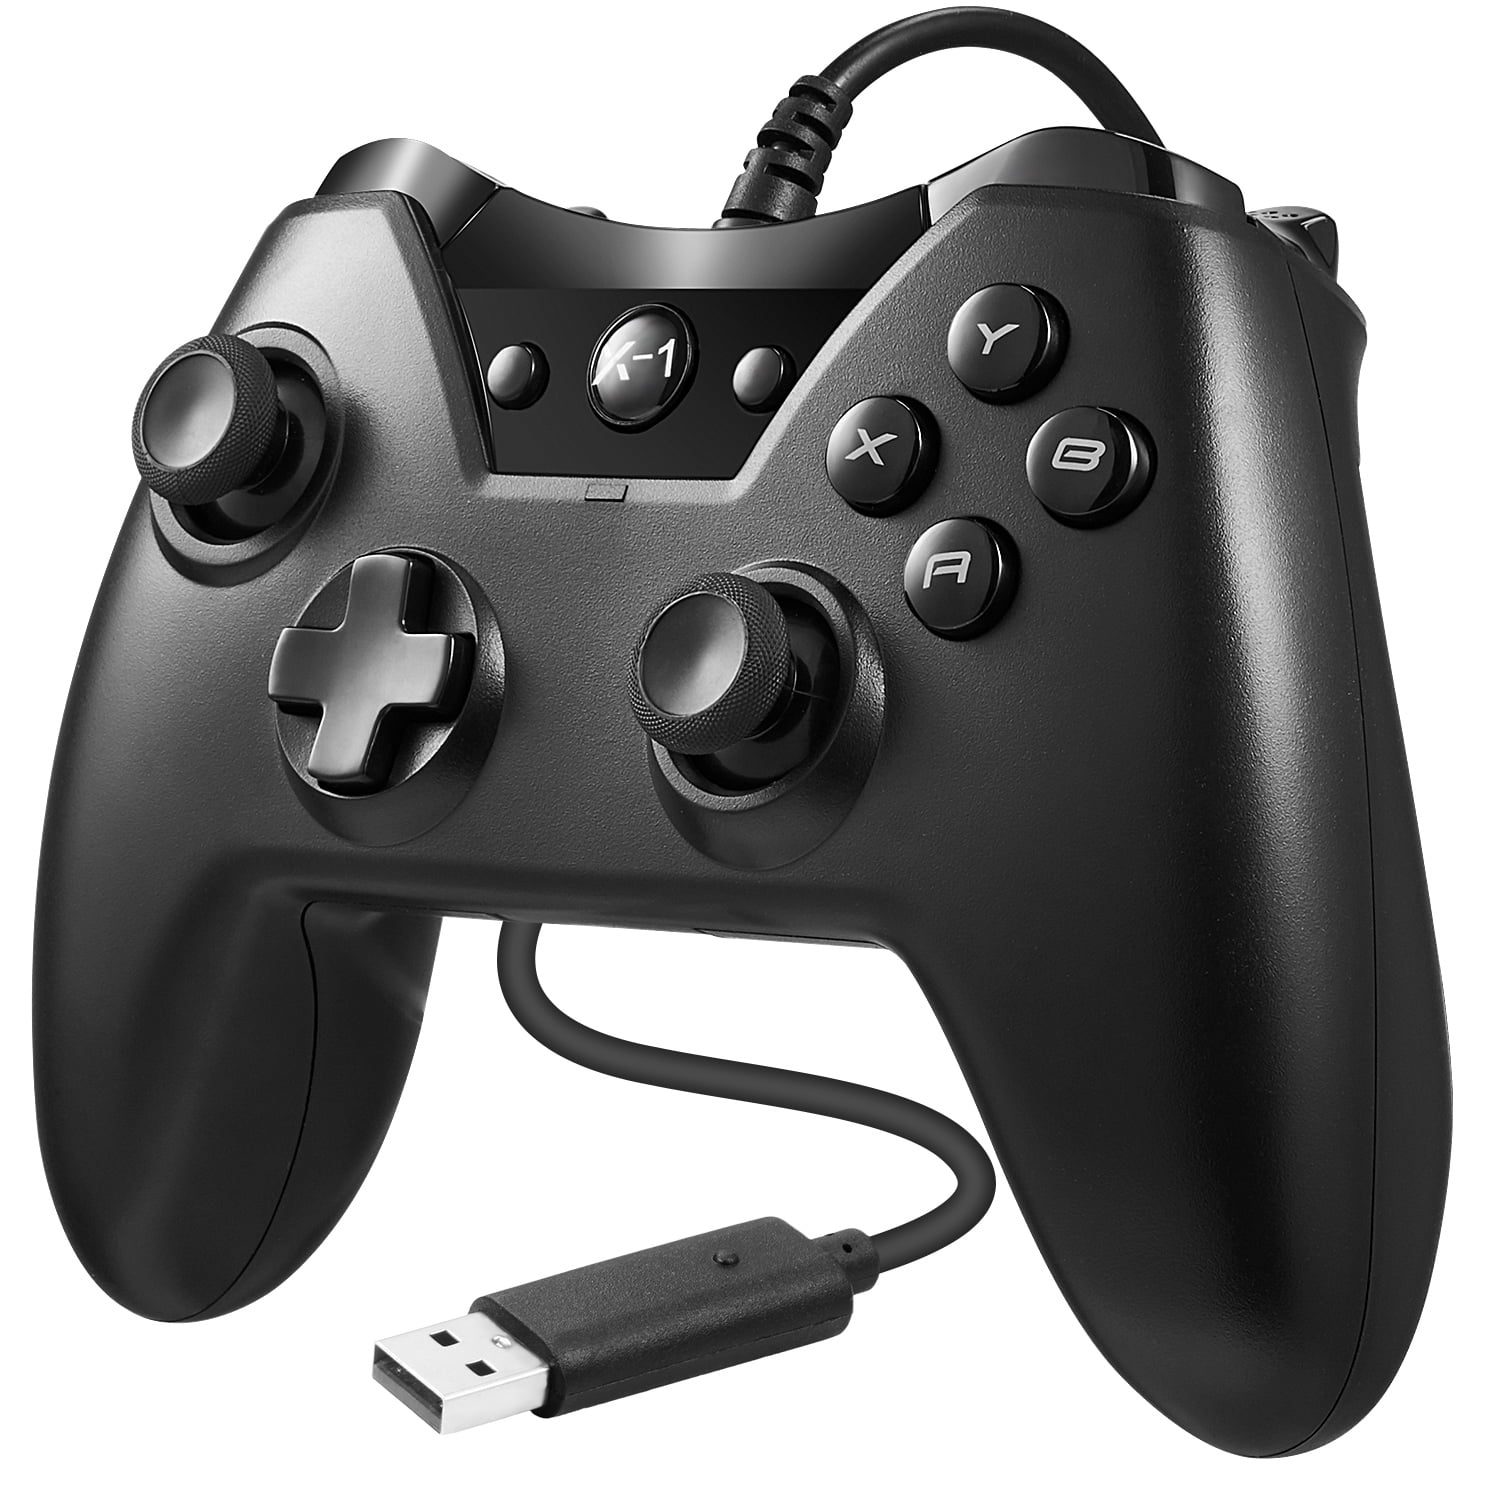 pcsx reloaded xbox one controller plugin